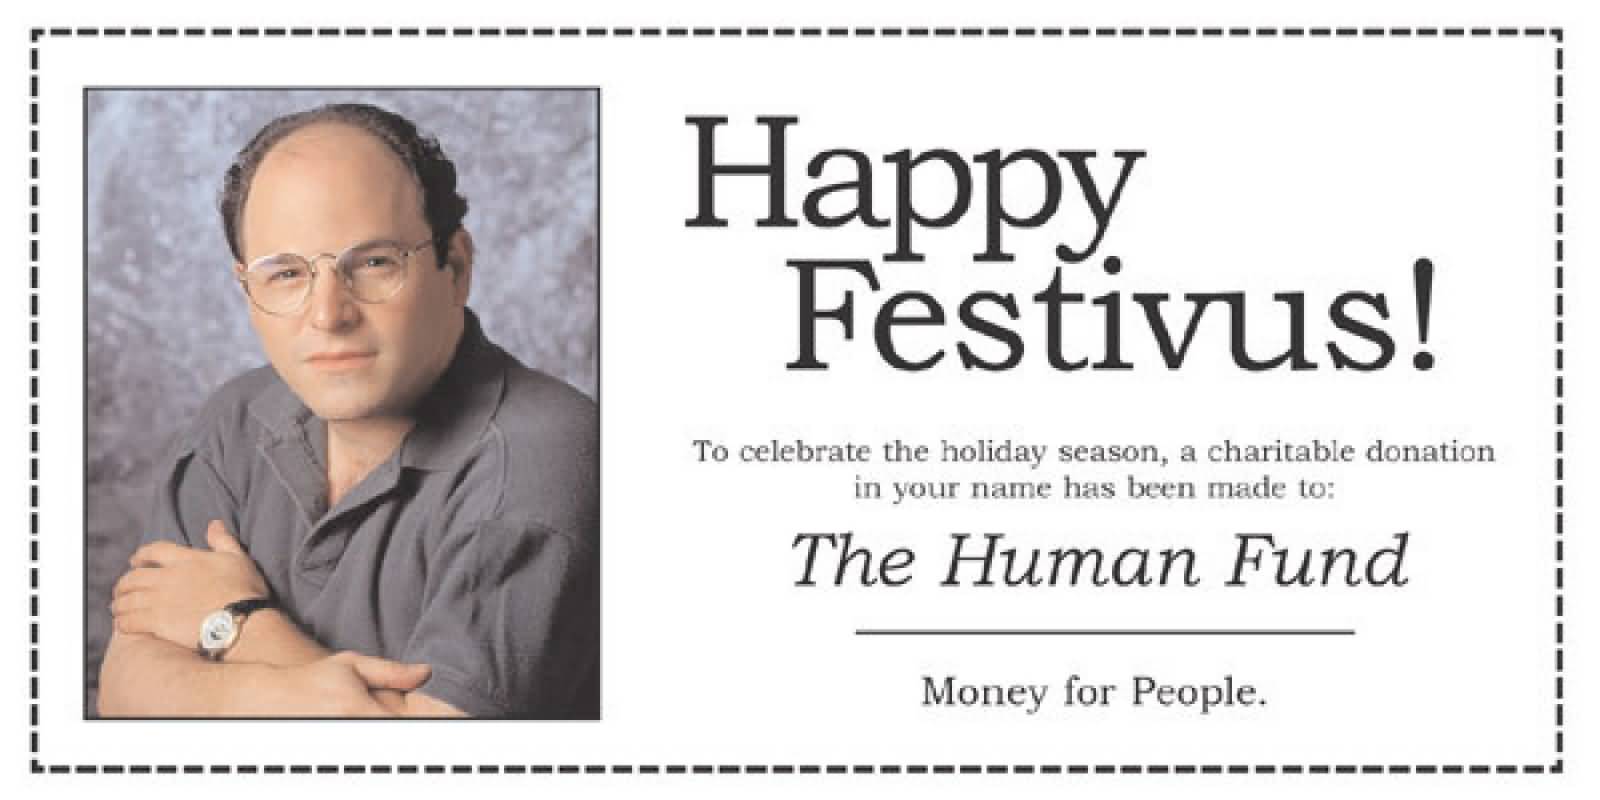 Happy Festivus To Celebrate The Holiday Season A Charitable Donation In Your Name Has Been Made To